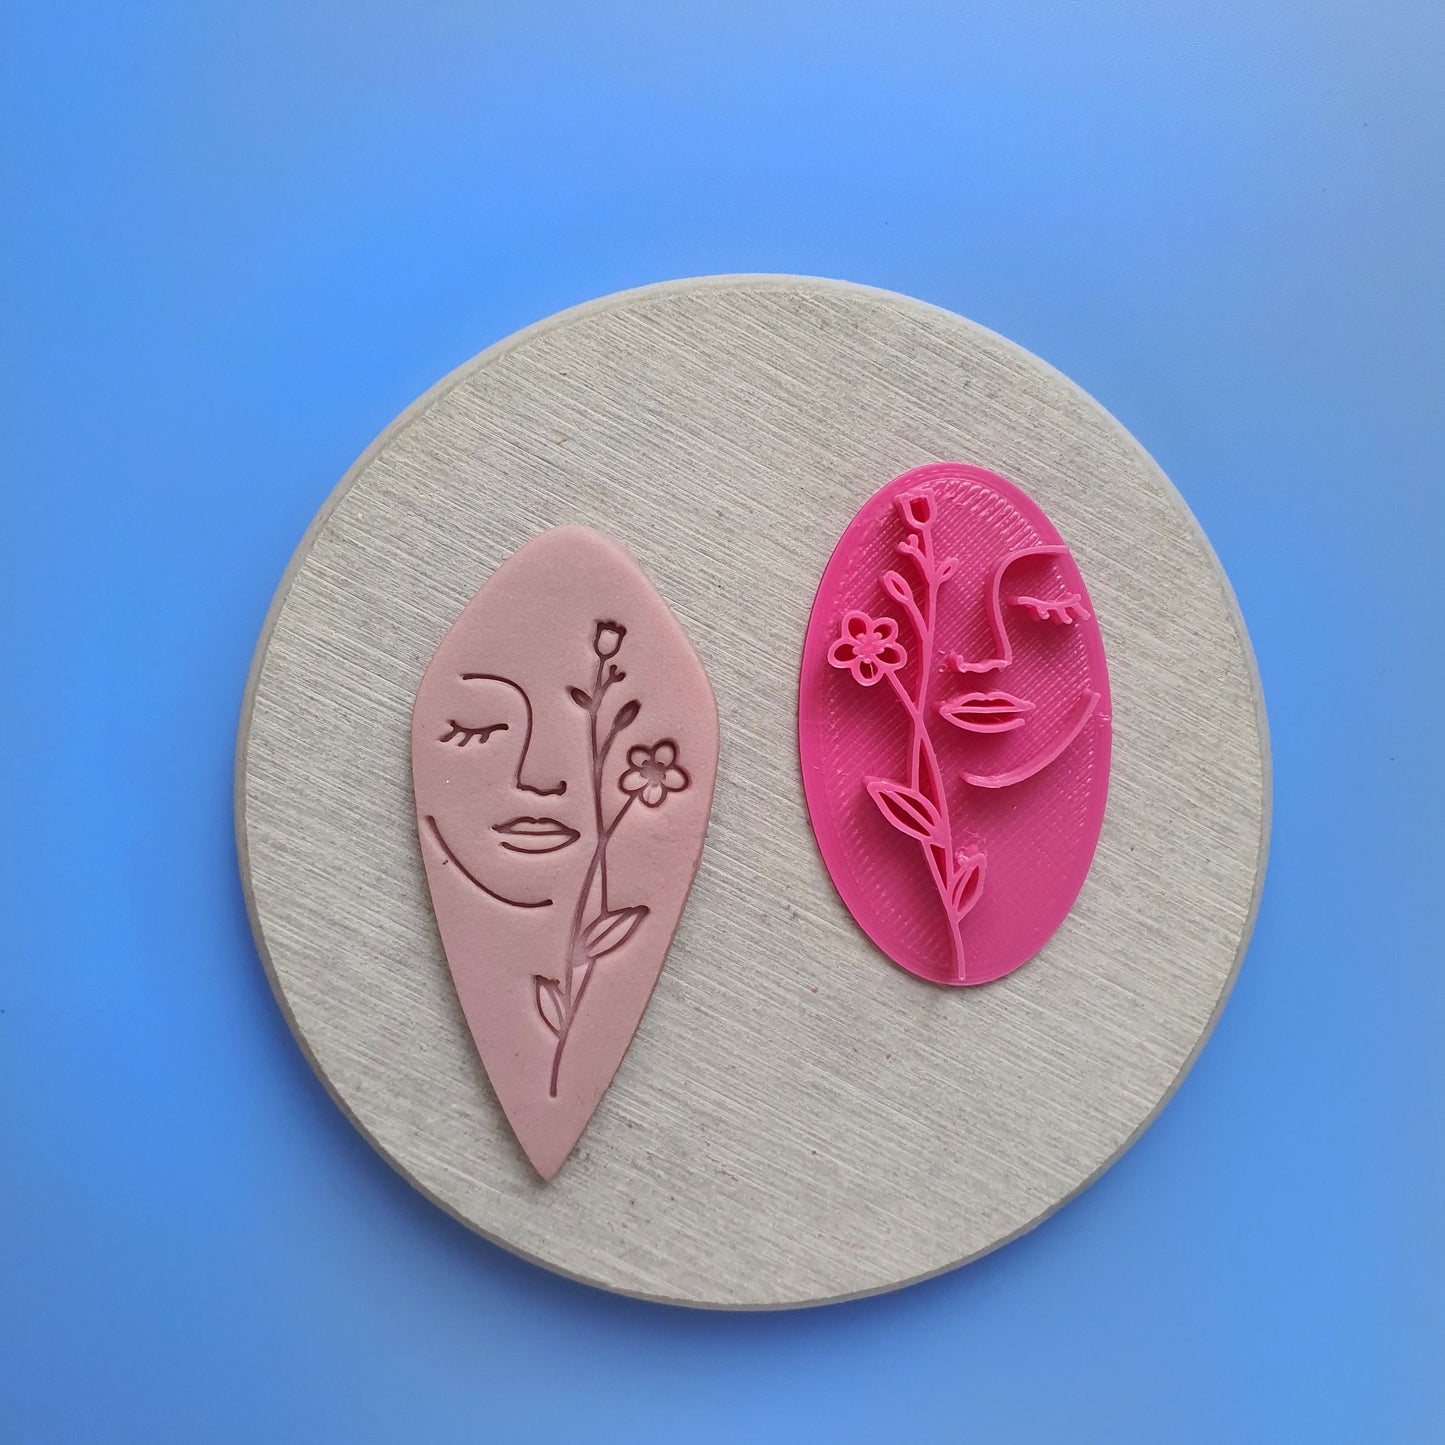 Polymer clay 3D "Woman, Flower" stamp embossing